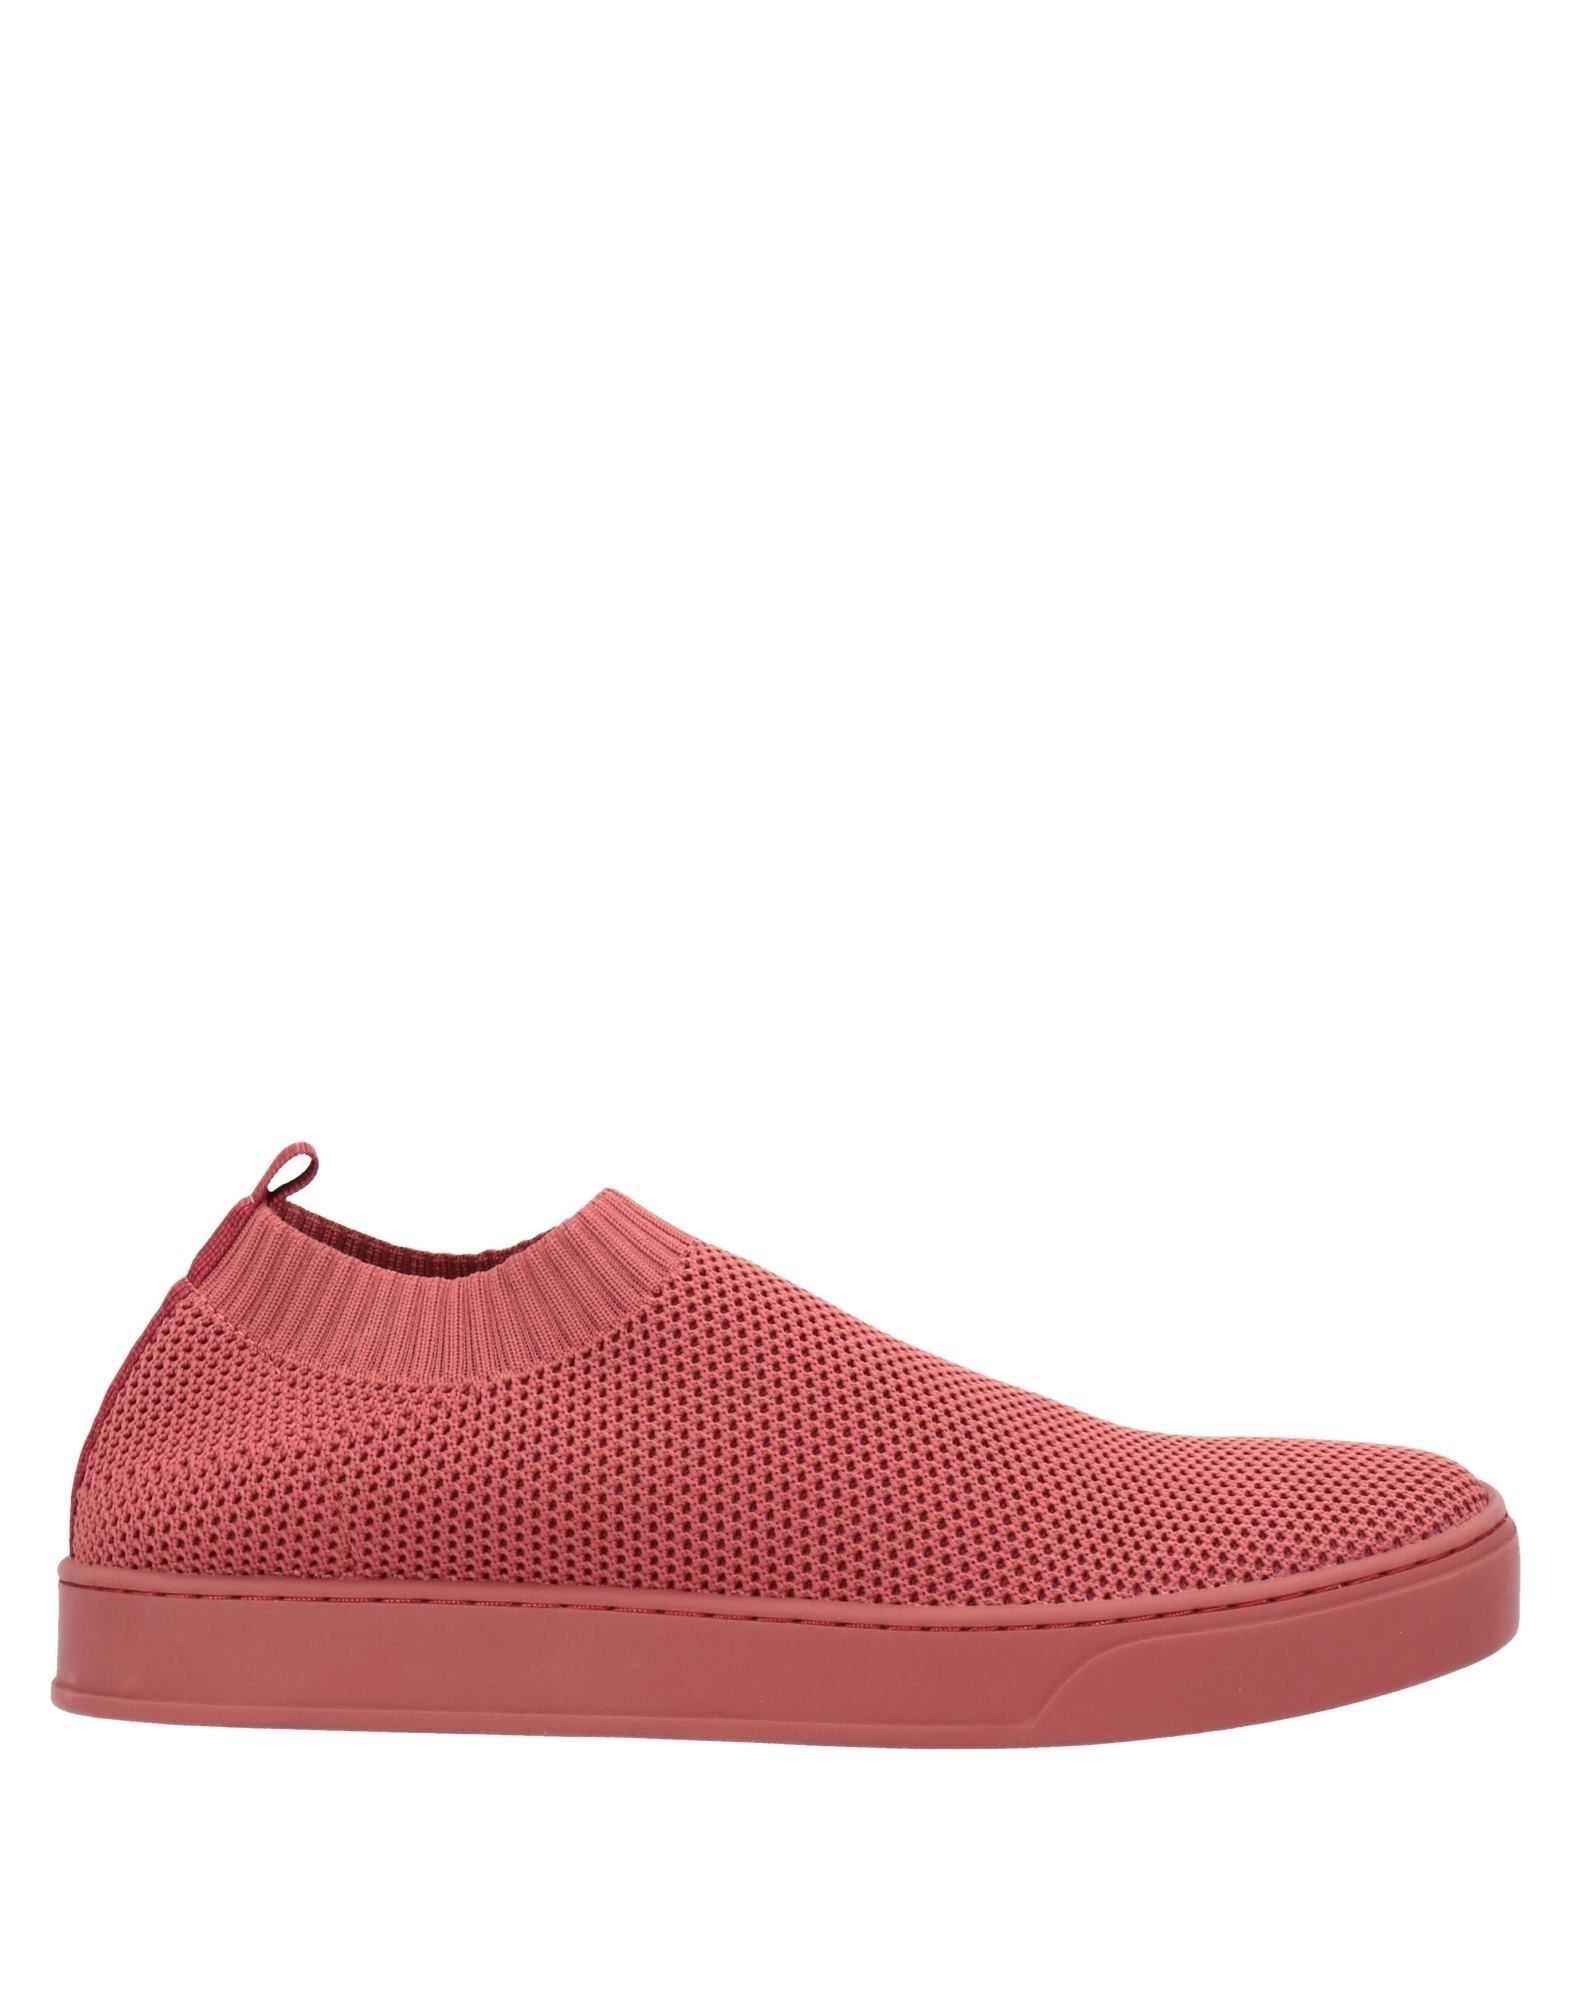 Max & Co Sneakers In Brick Red